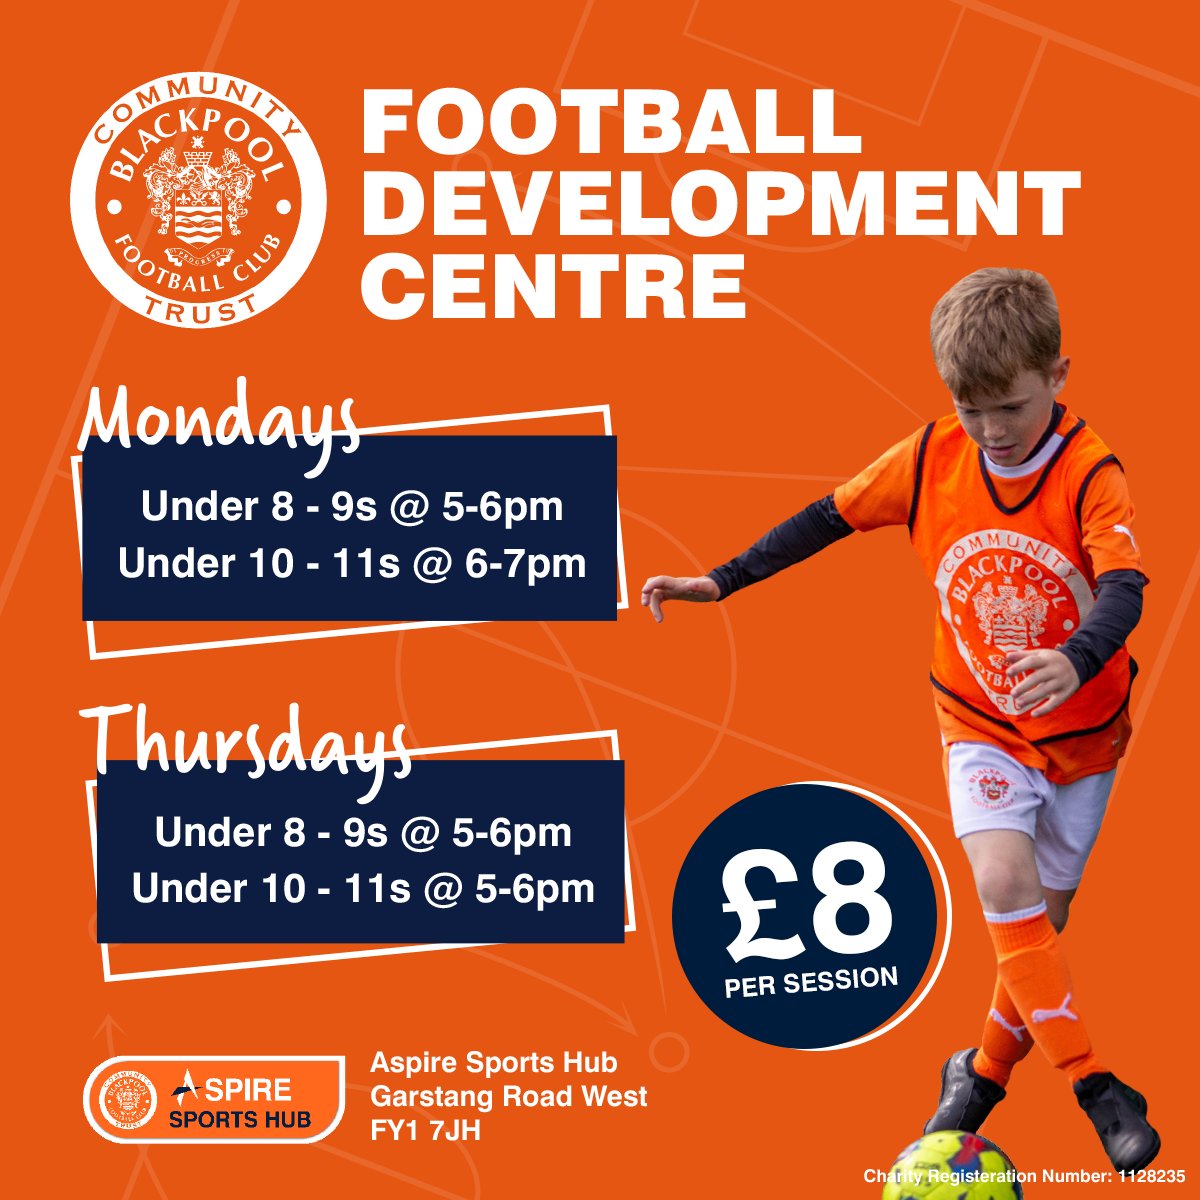 Join us at our Football Development Centres which focus on skill development for both outfield players and goalkeepers ⚽ Our centres aim to progress footballers and help develop their confidence🧡 For more info on our Centres and to book click below 👇 bfcct.co.uk/programme/foot…